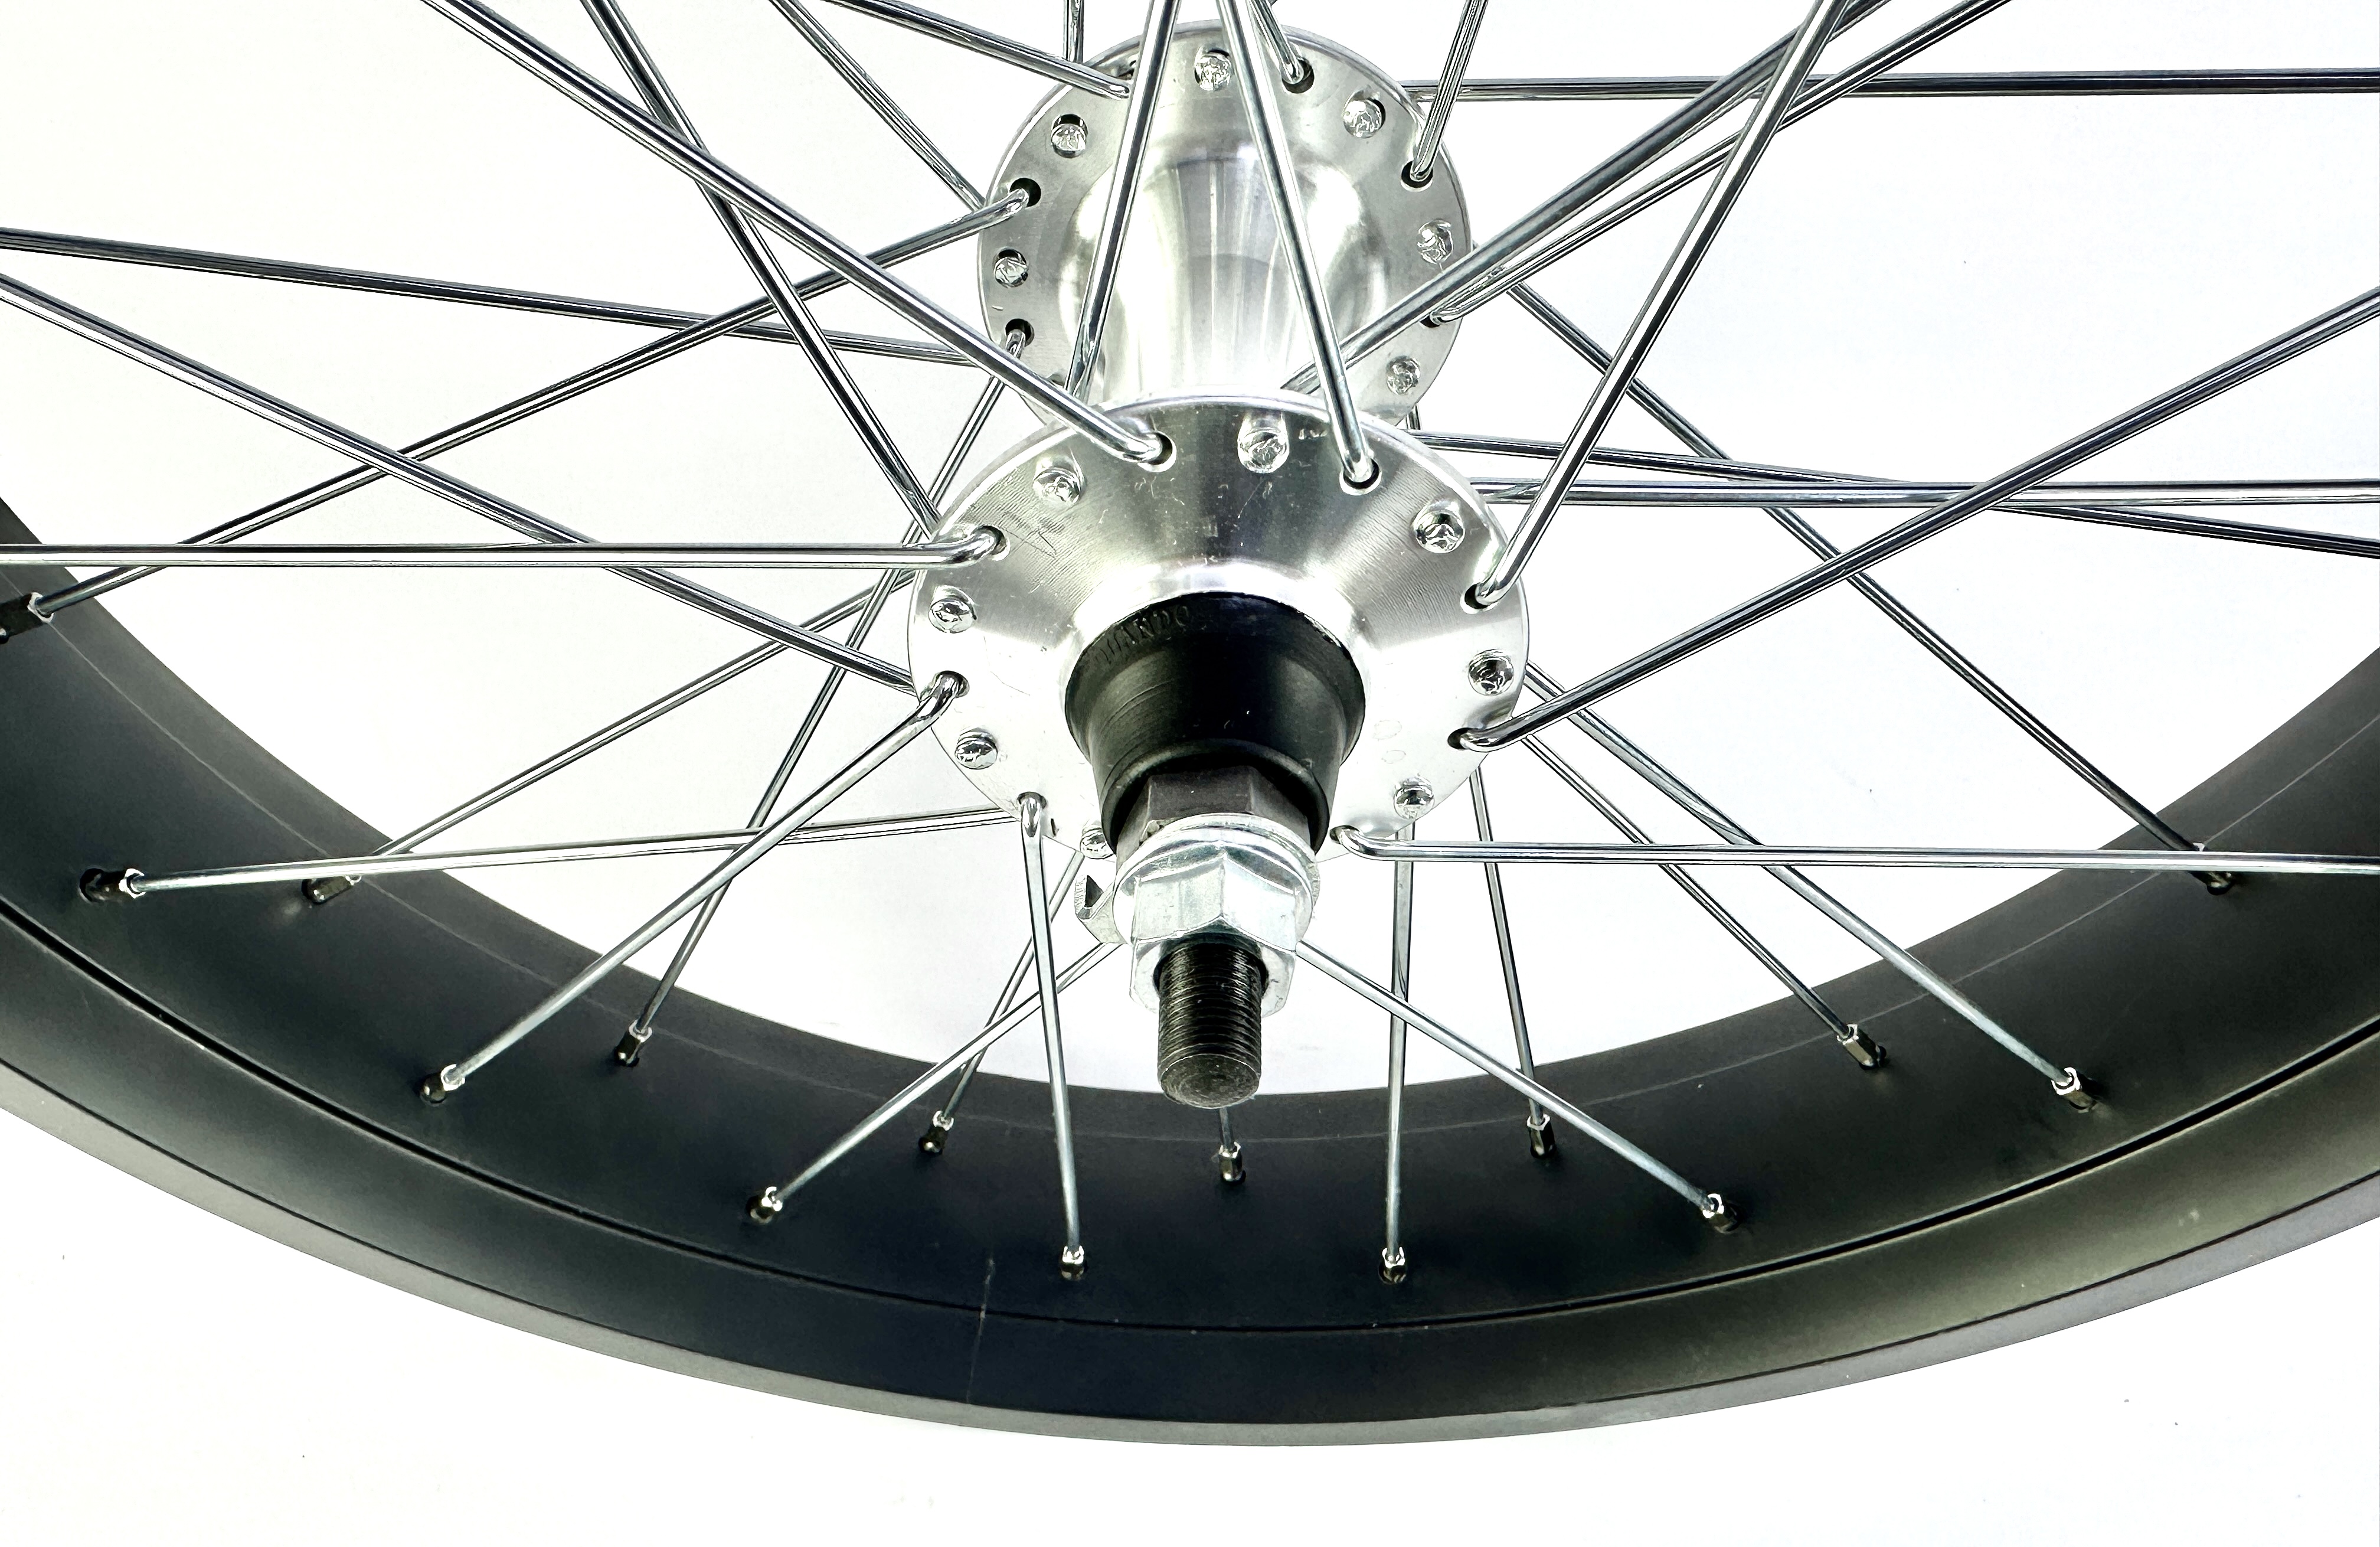 204 Front Wheel  20 x 4 inch Fat Bike 80 mm black with Disk silver Hub